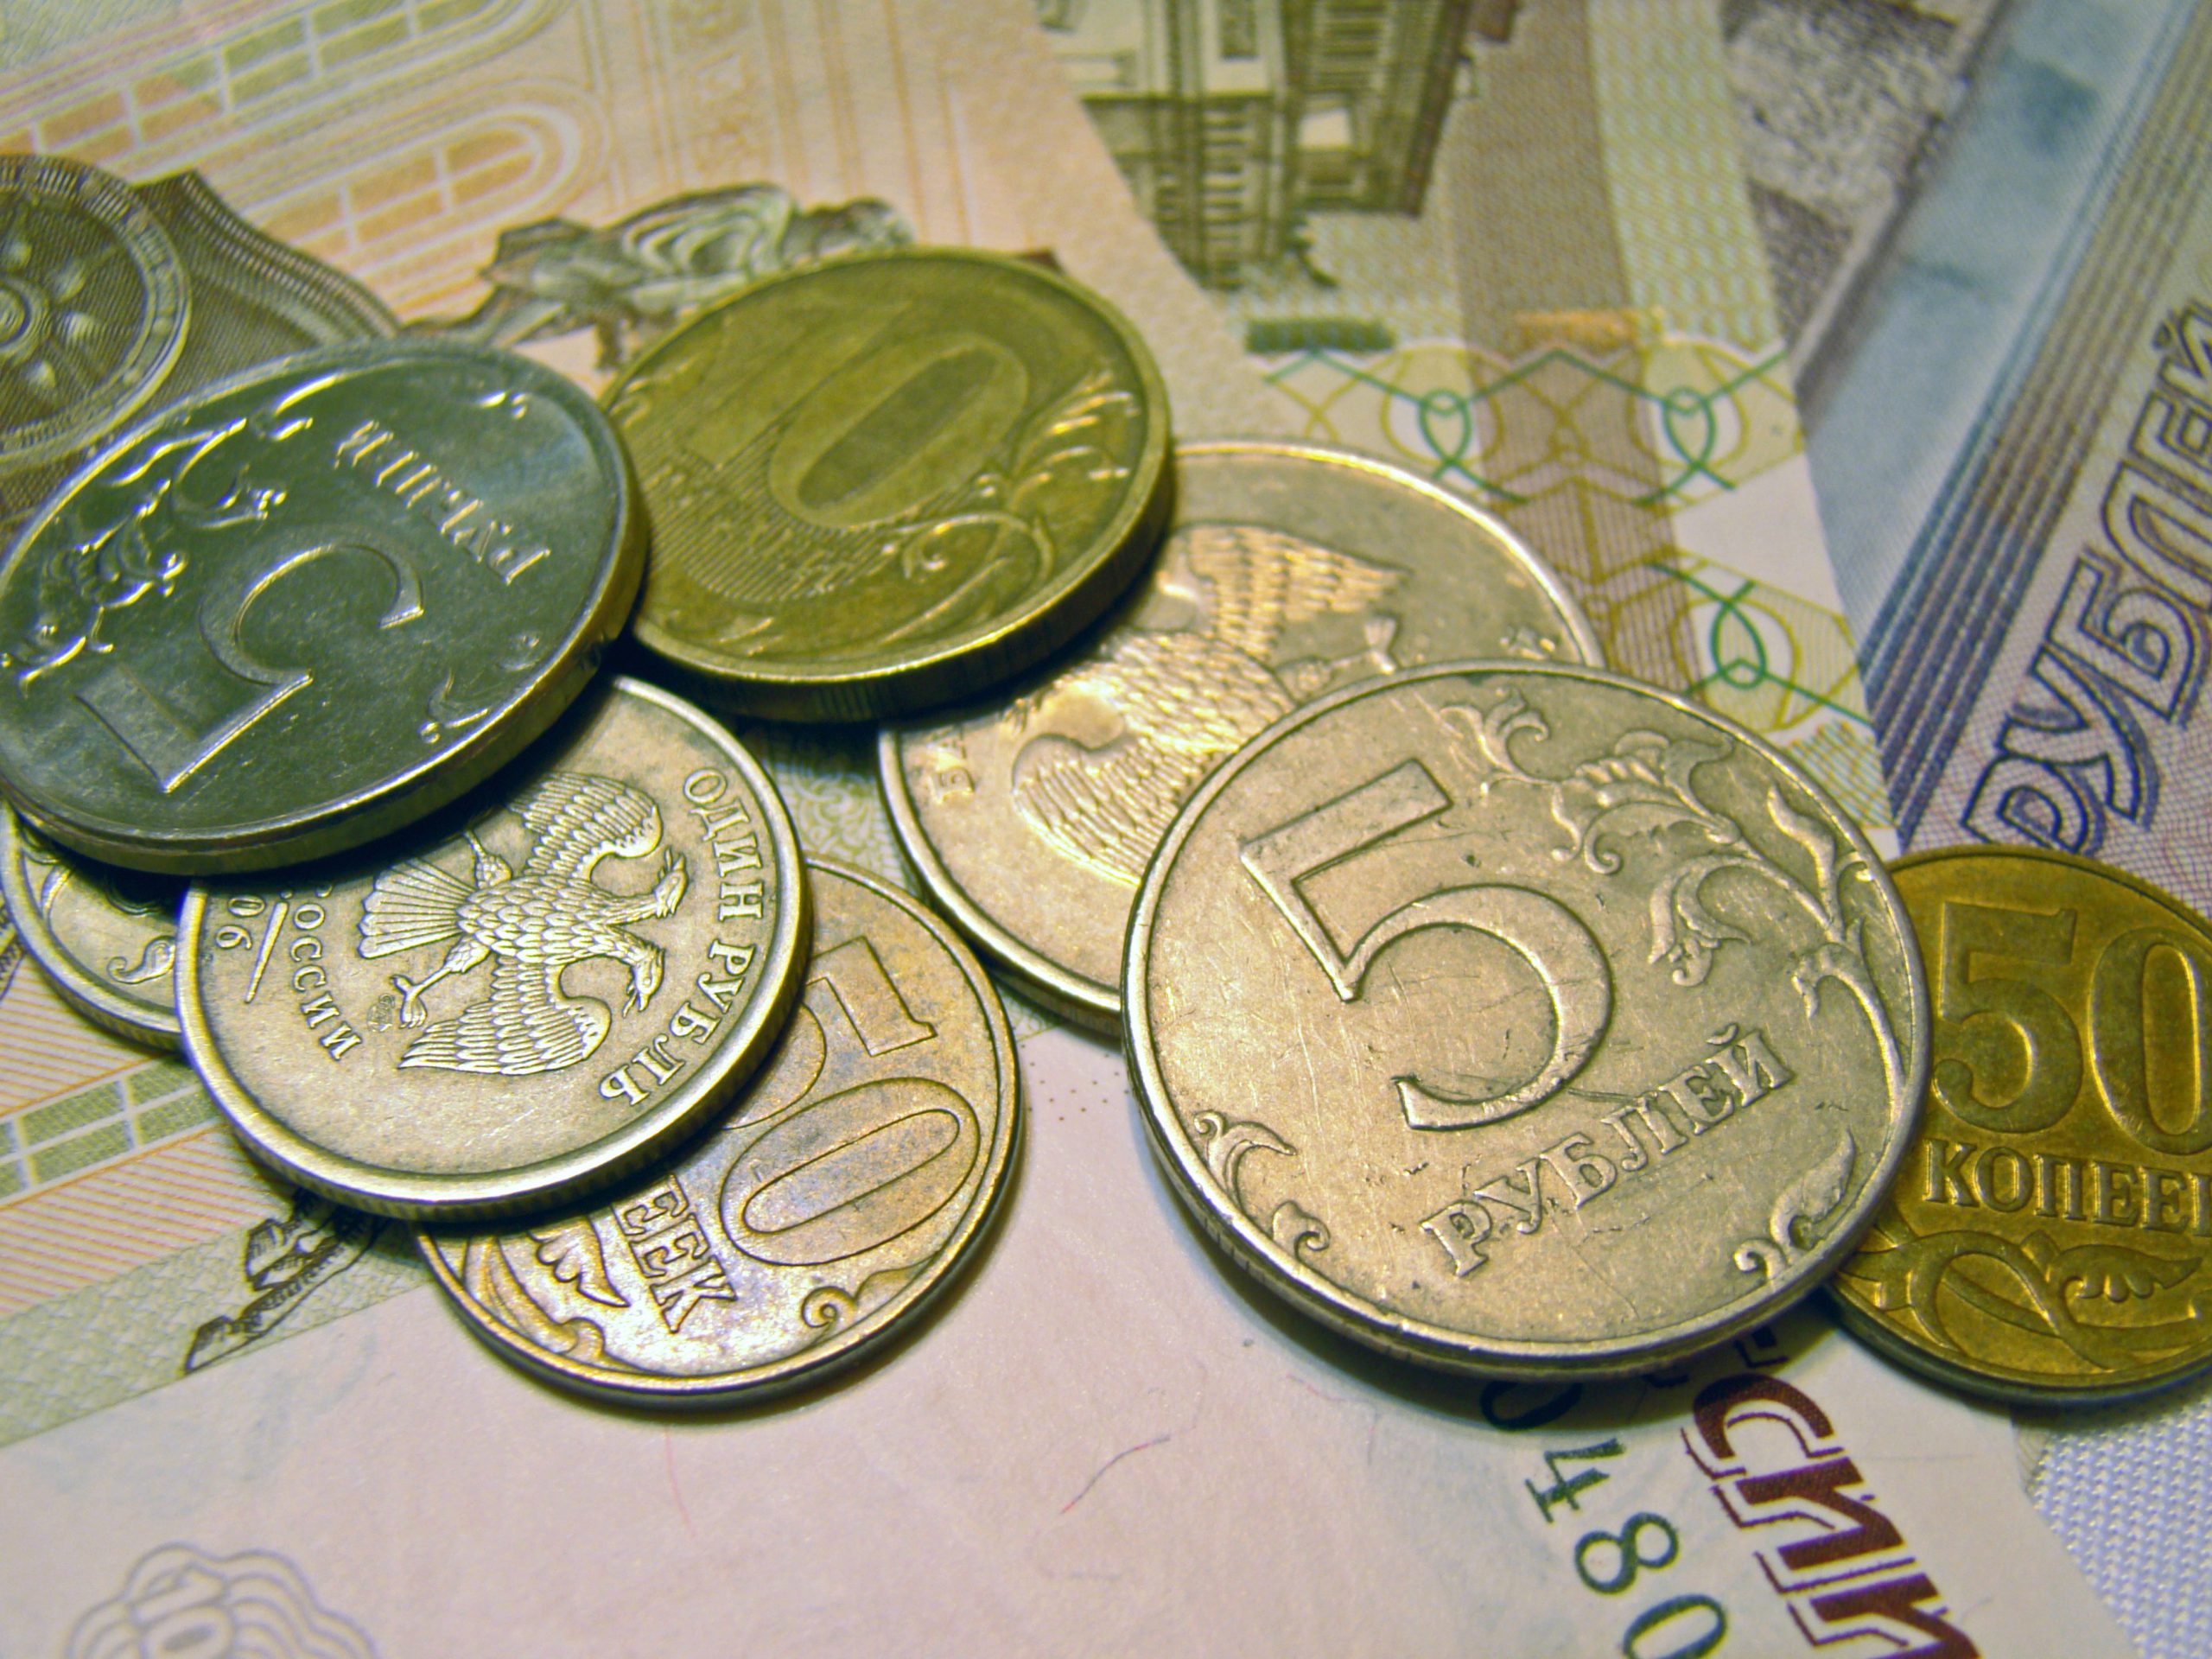 Russians buy up gold to salvage savings after ruble collapse